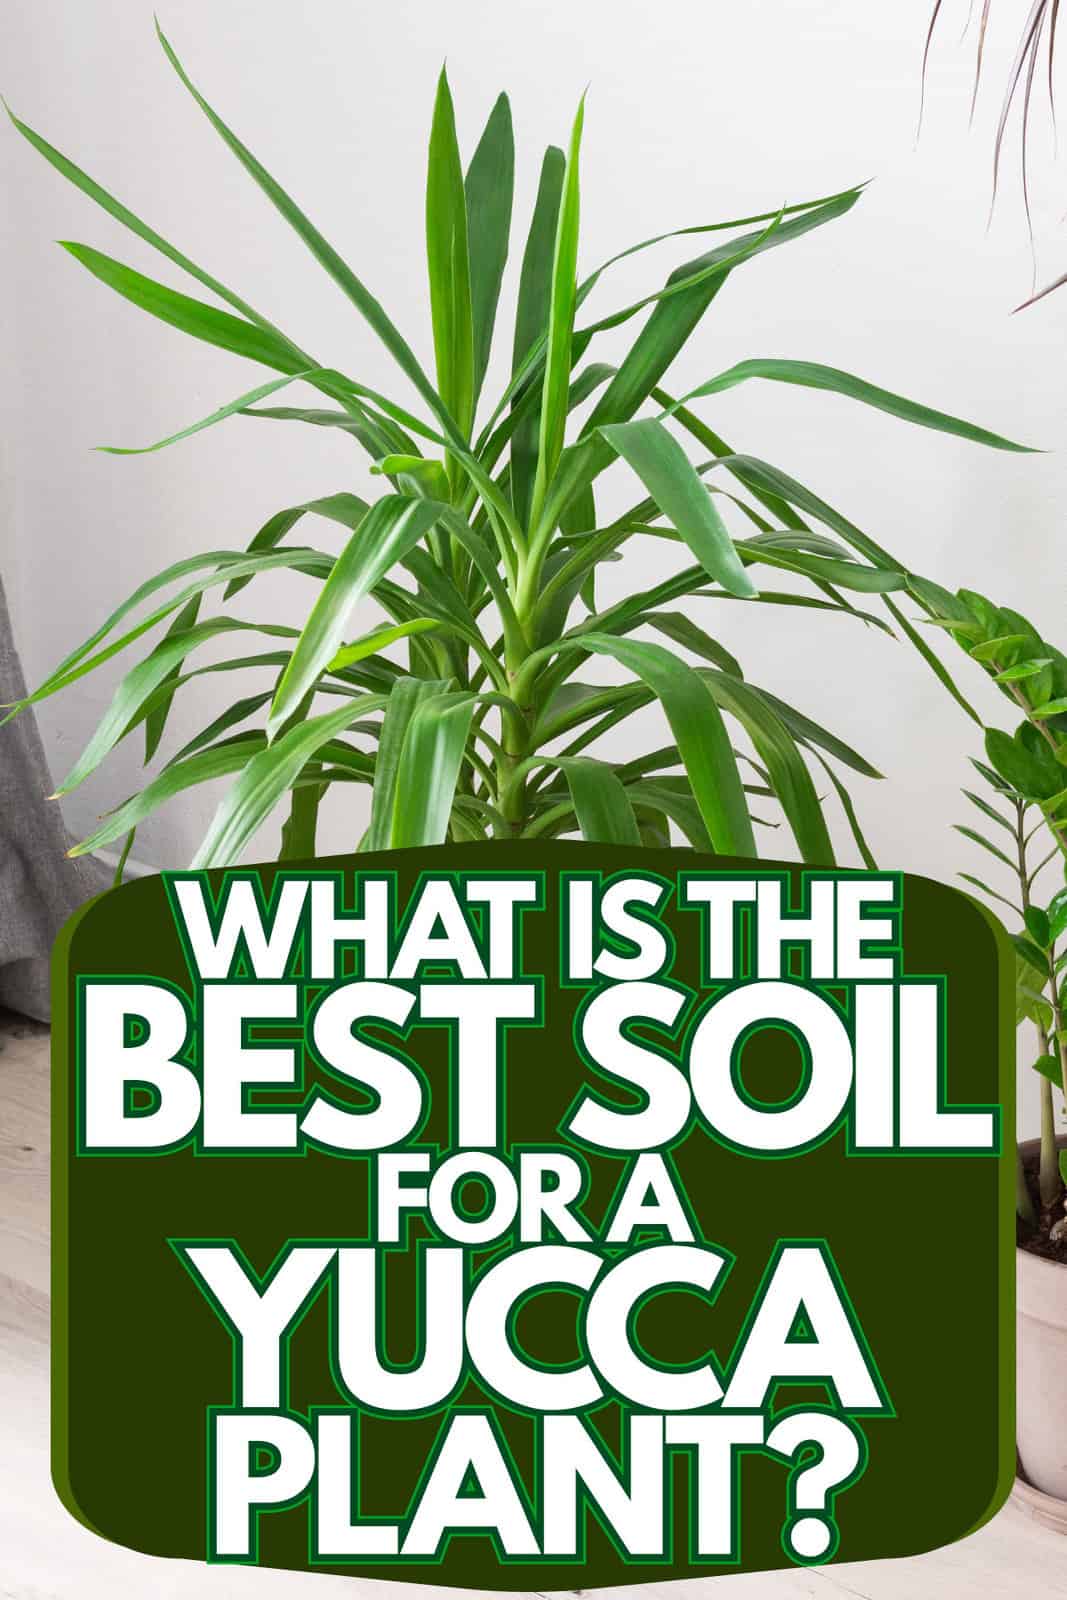 What Is The Best Soil For A Yucca Plant?